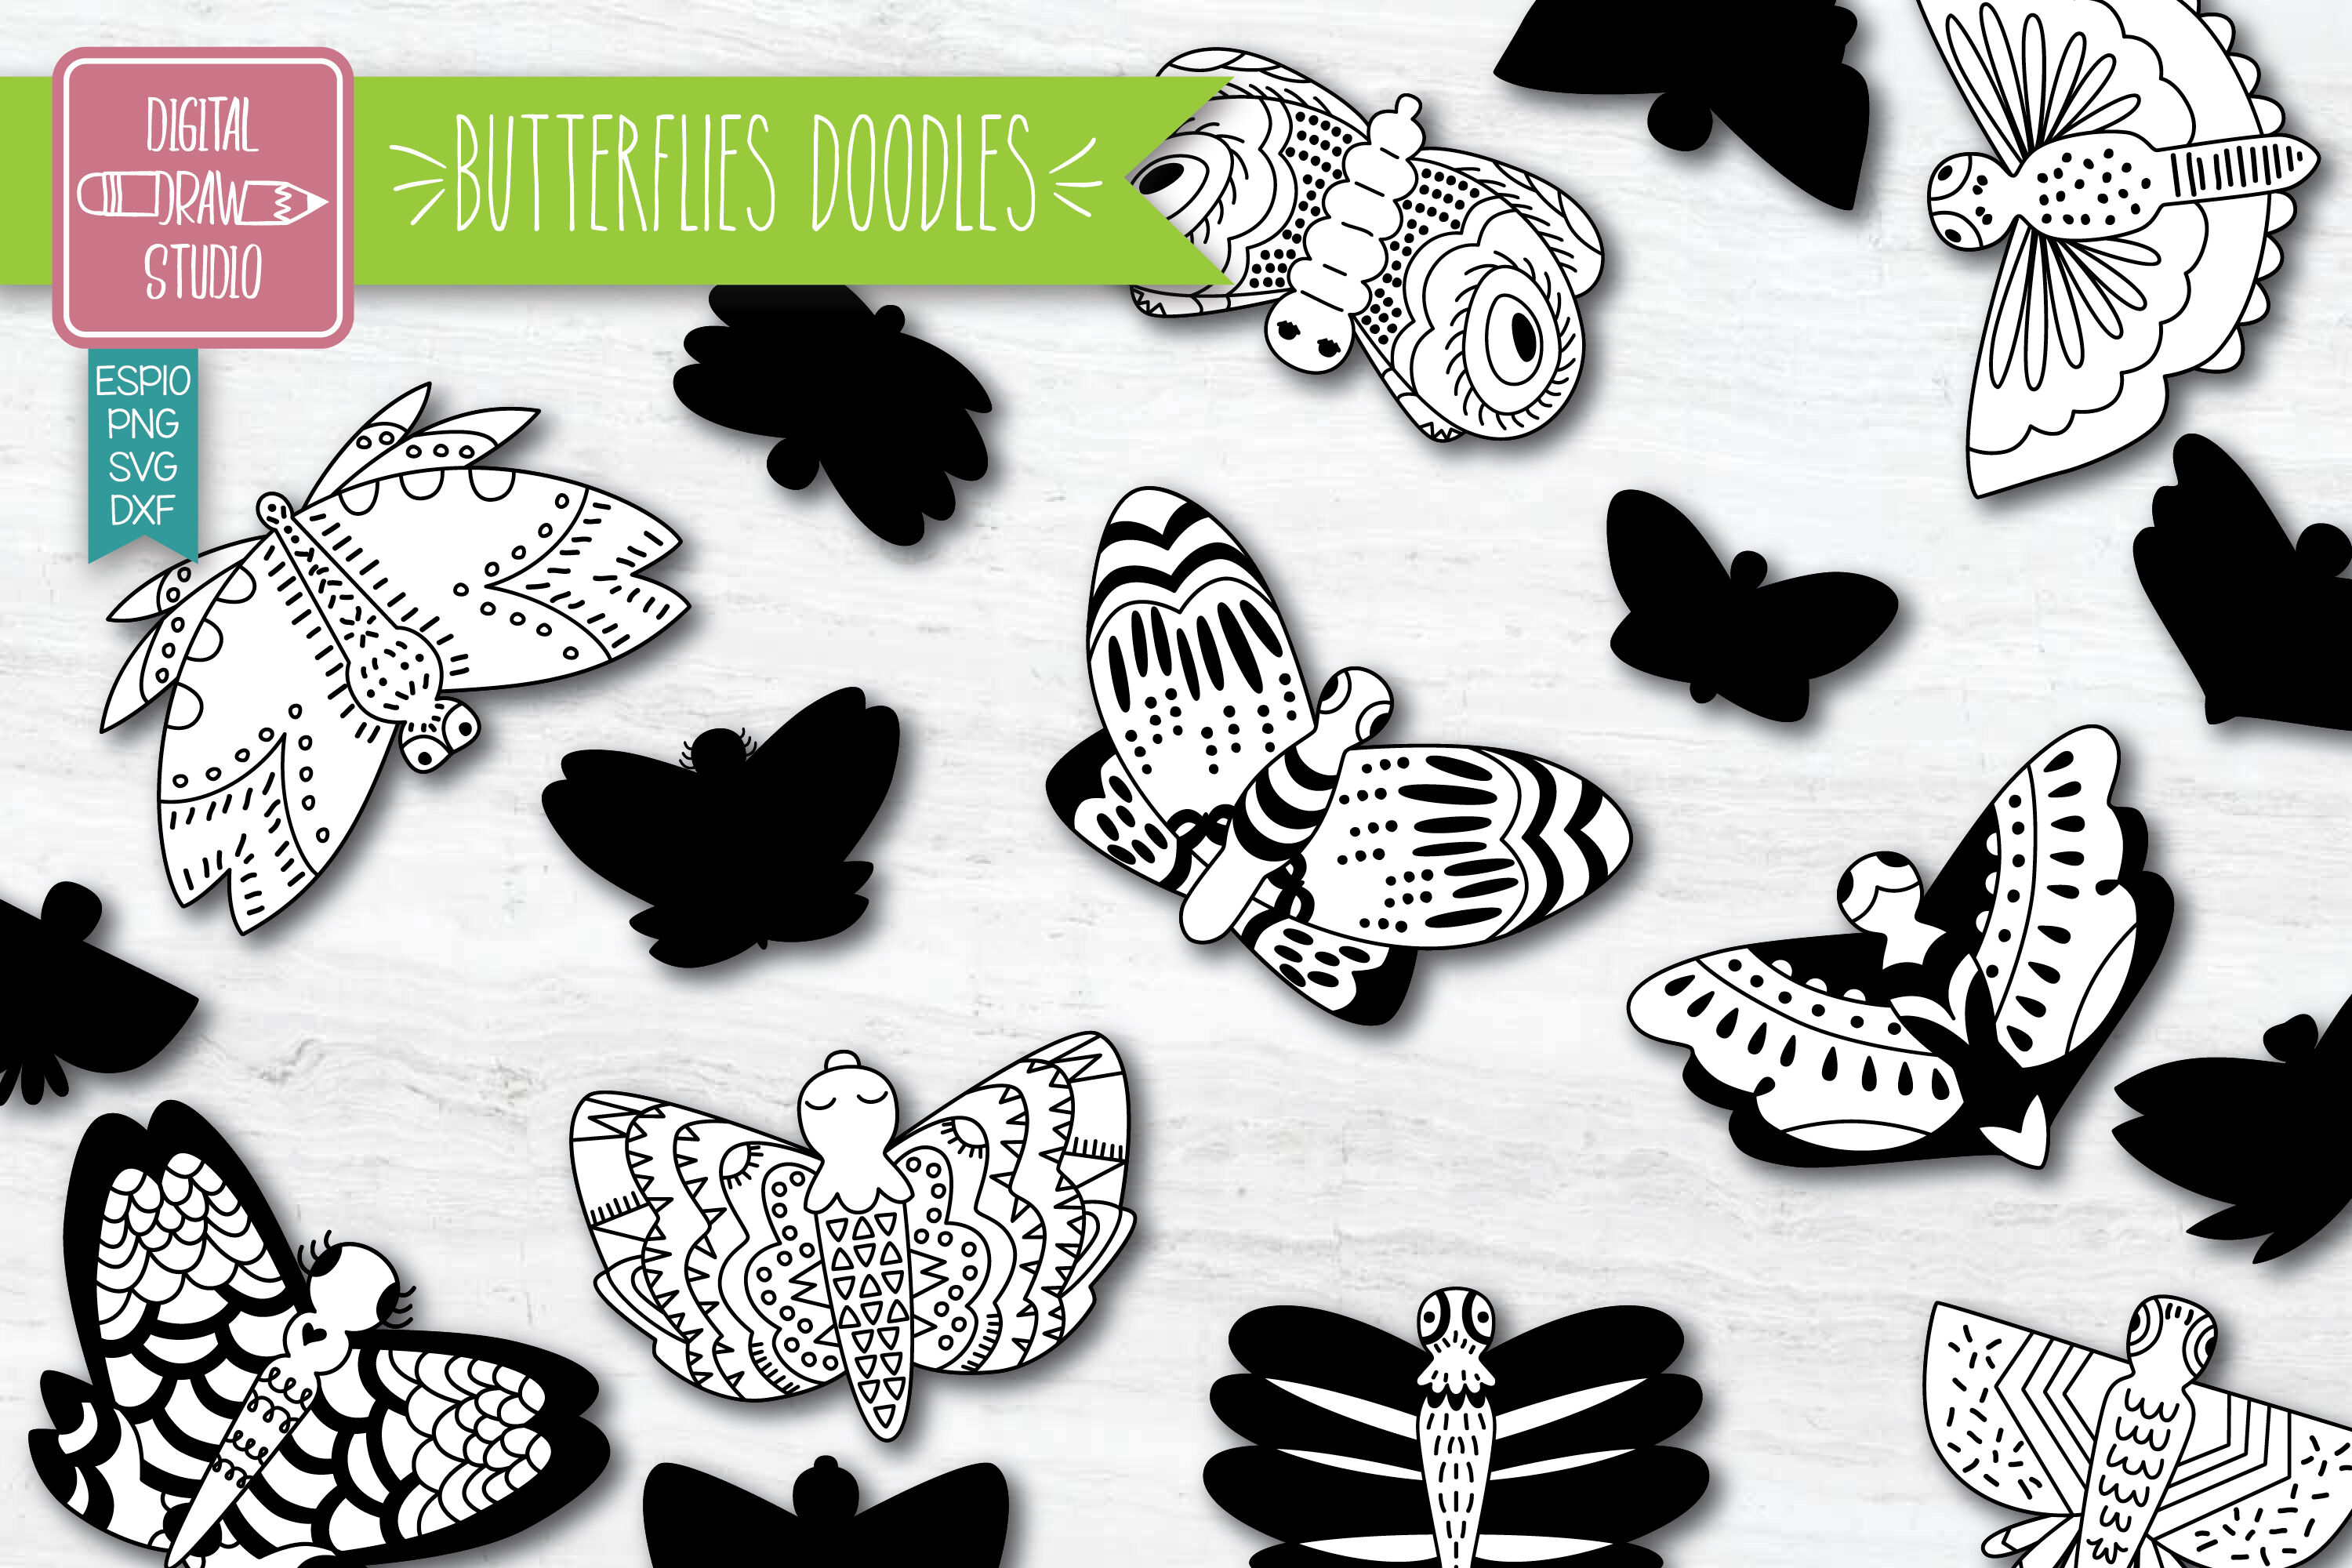 Hand Drawn Butterflies Clip Art Moth Insect Bugs Illustration By Digital Draw Studio Thehungryjpeg Com